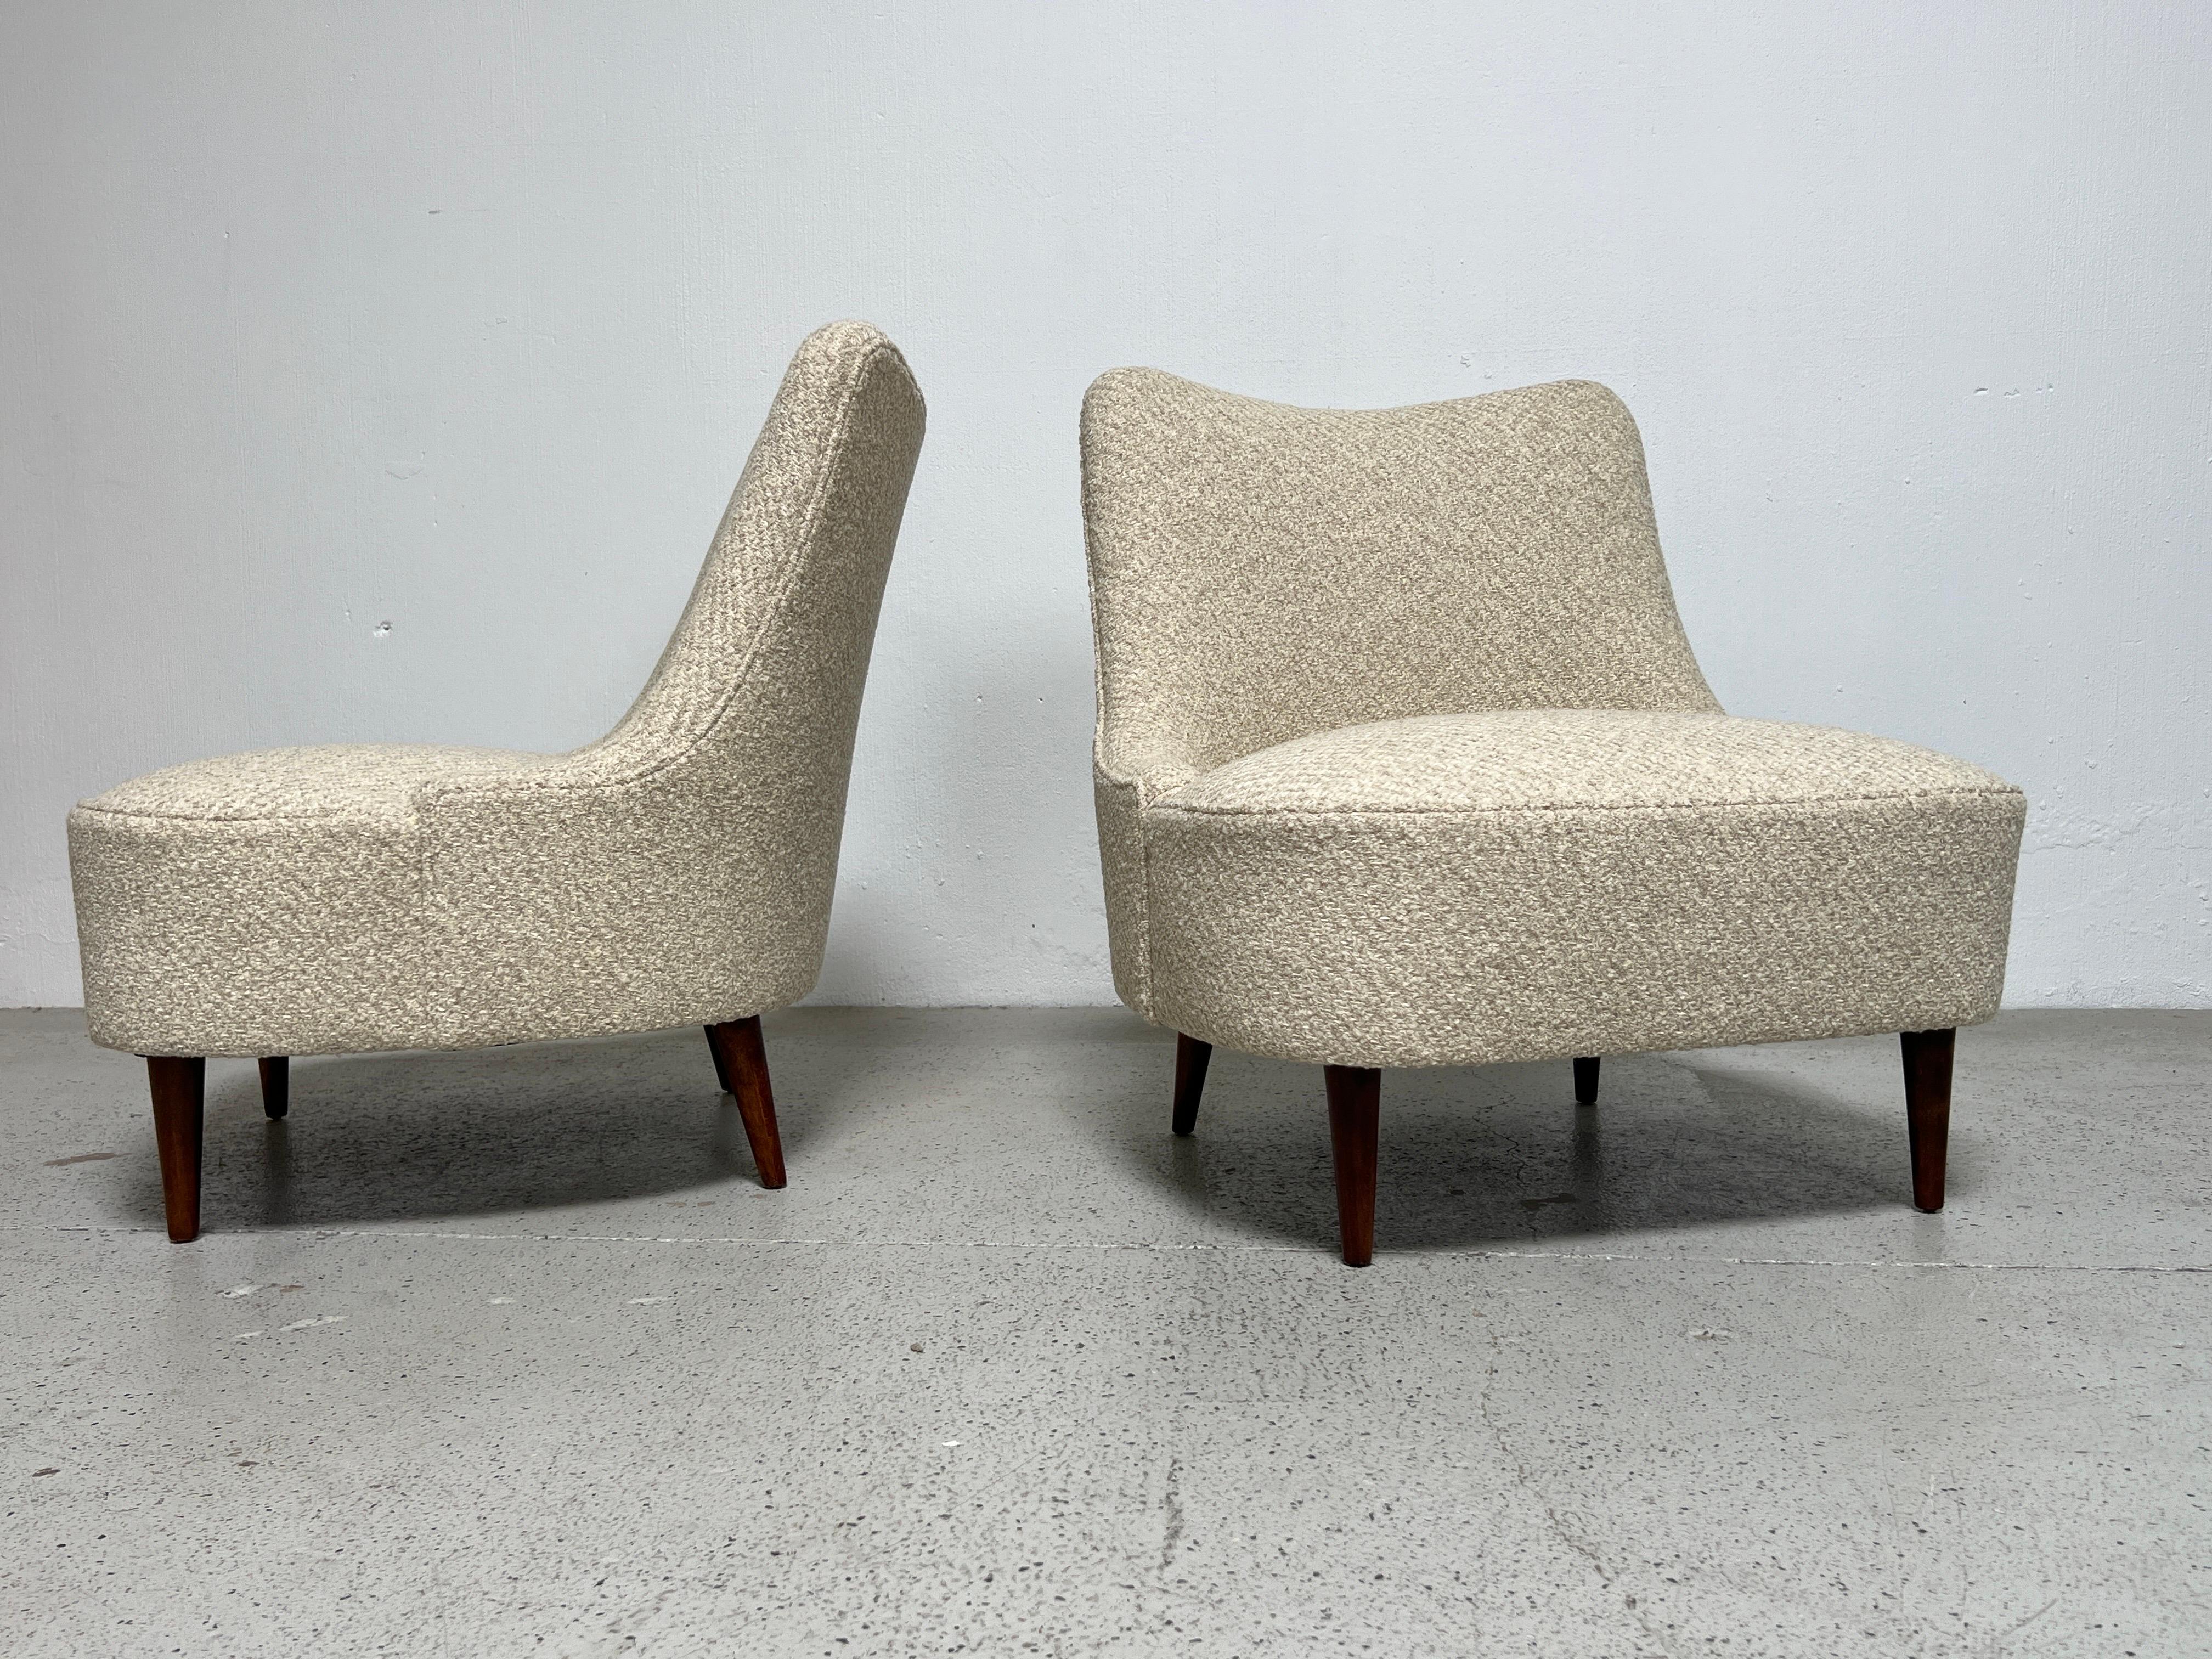 A pair of early teardrop slipper chairs with walnut legs. Designed by Edward Wormley for Dunbar.